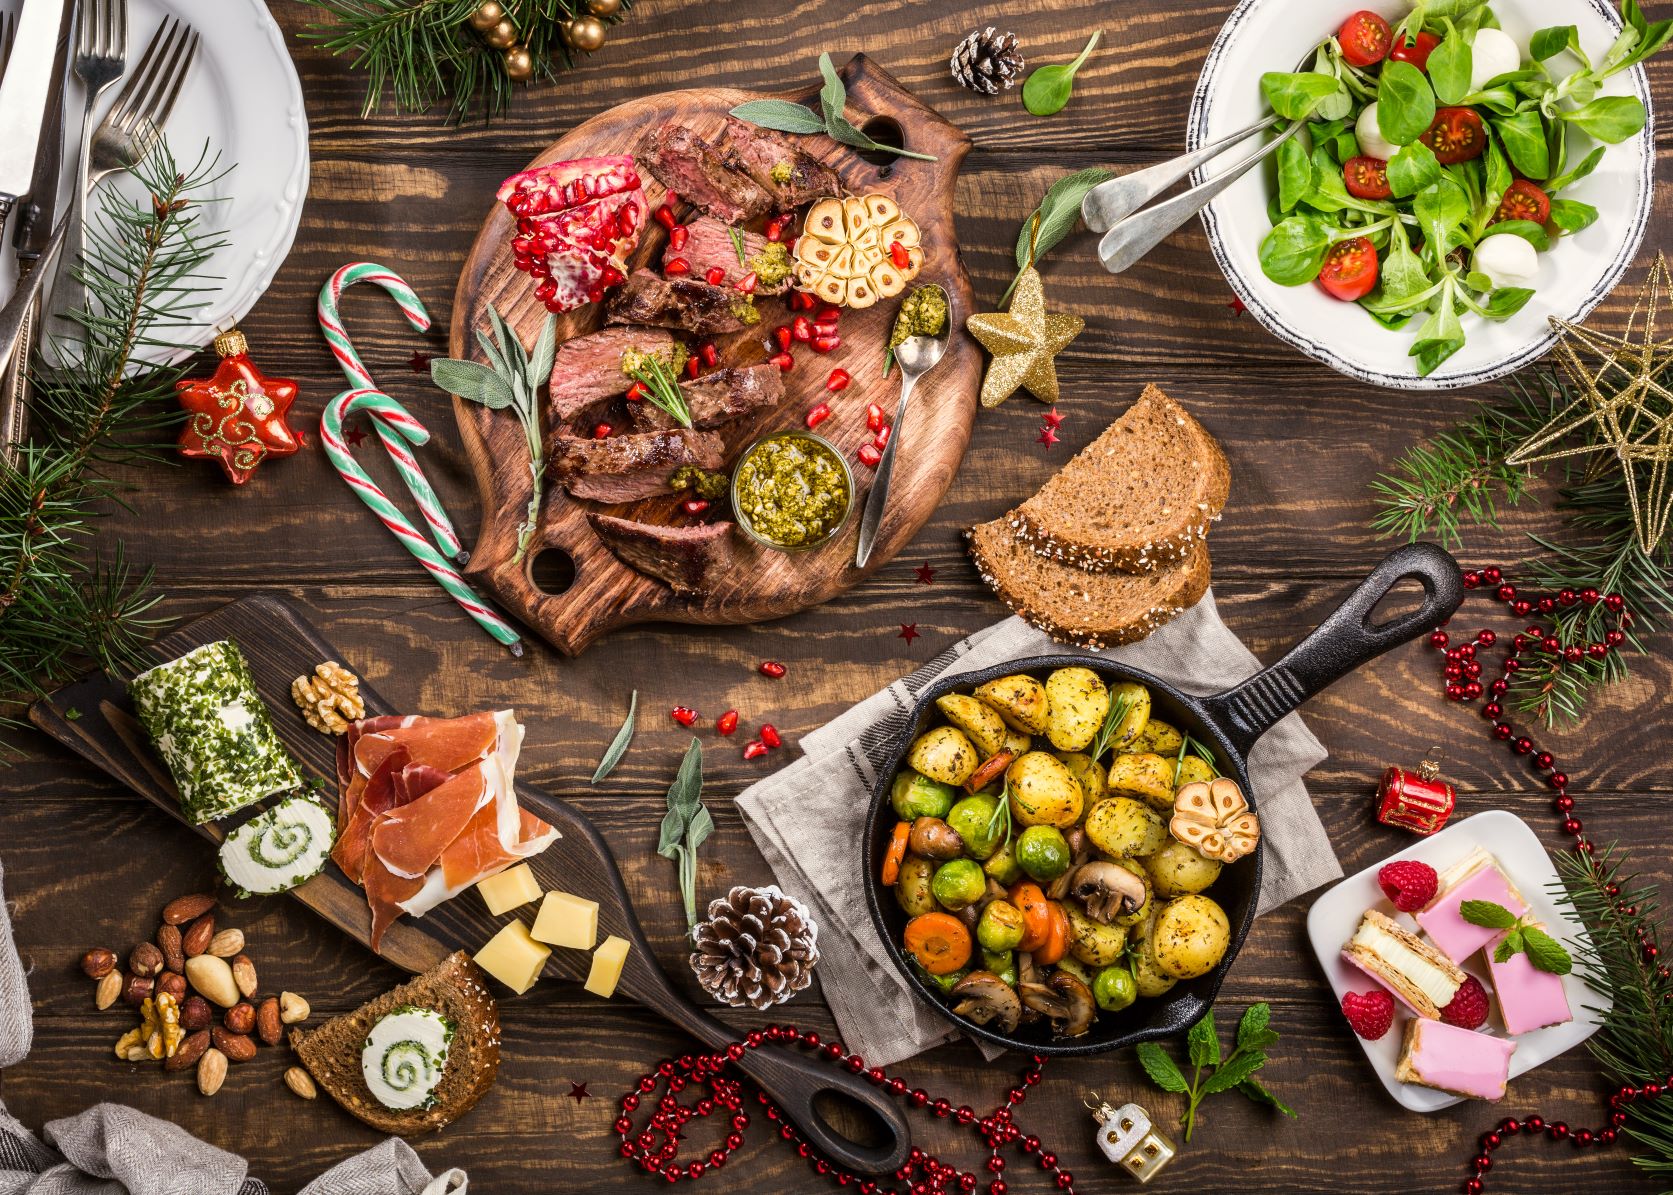 How To Stay Healthy During The Holidays